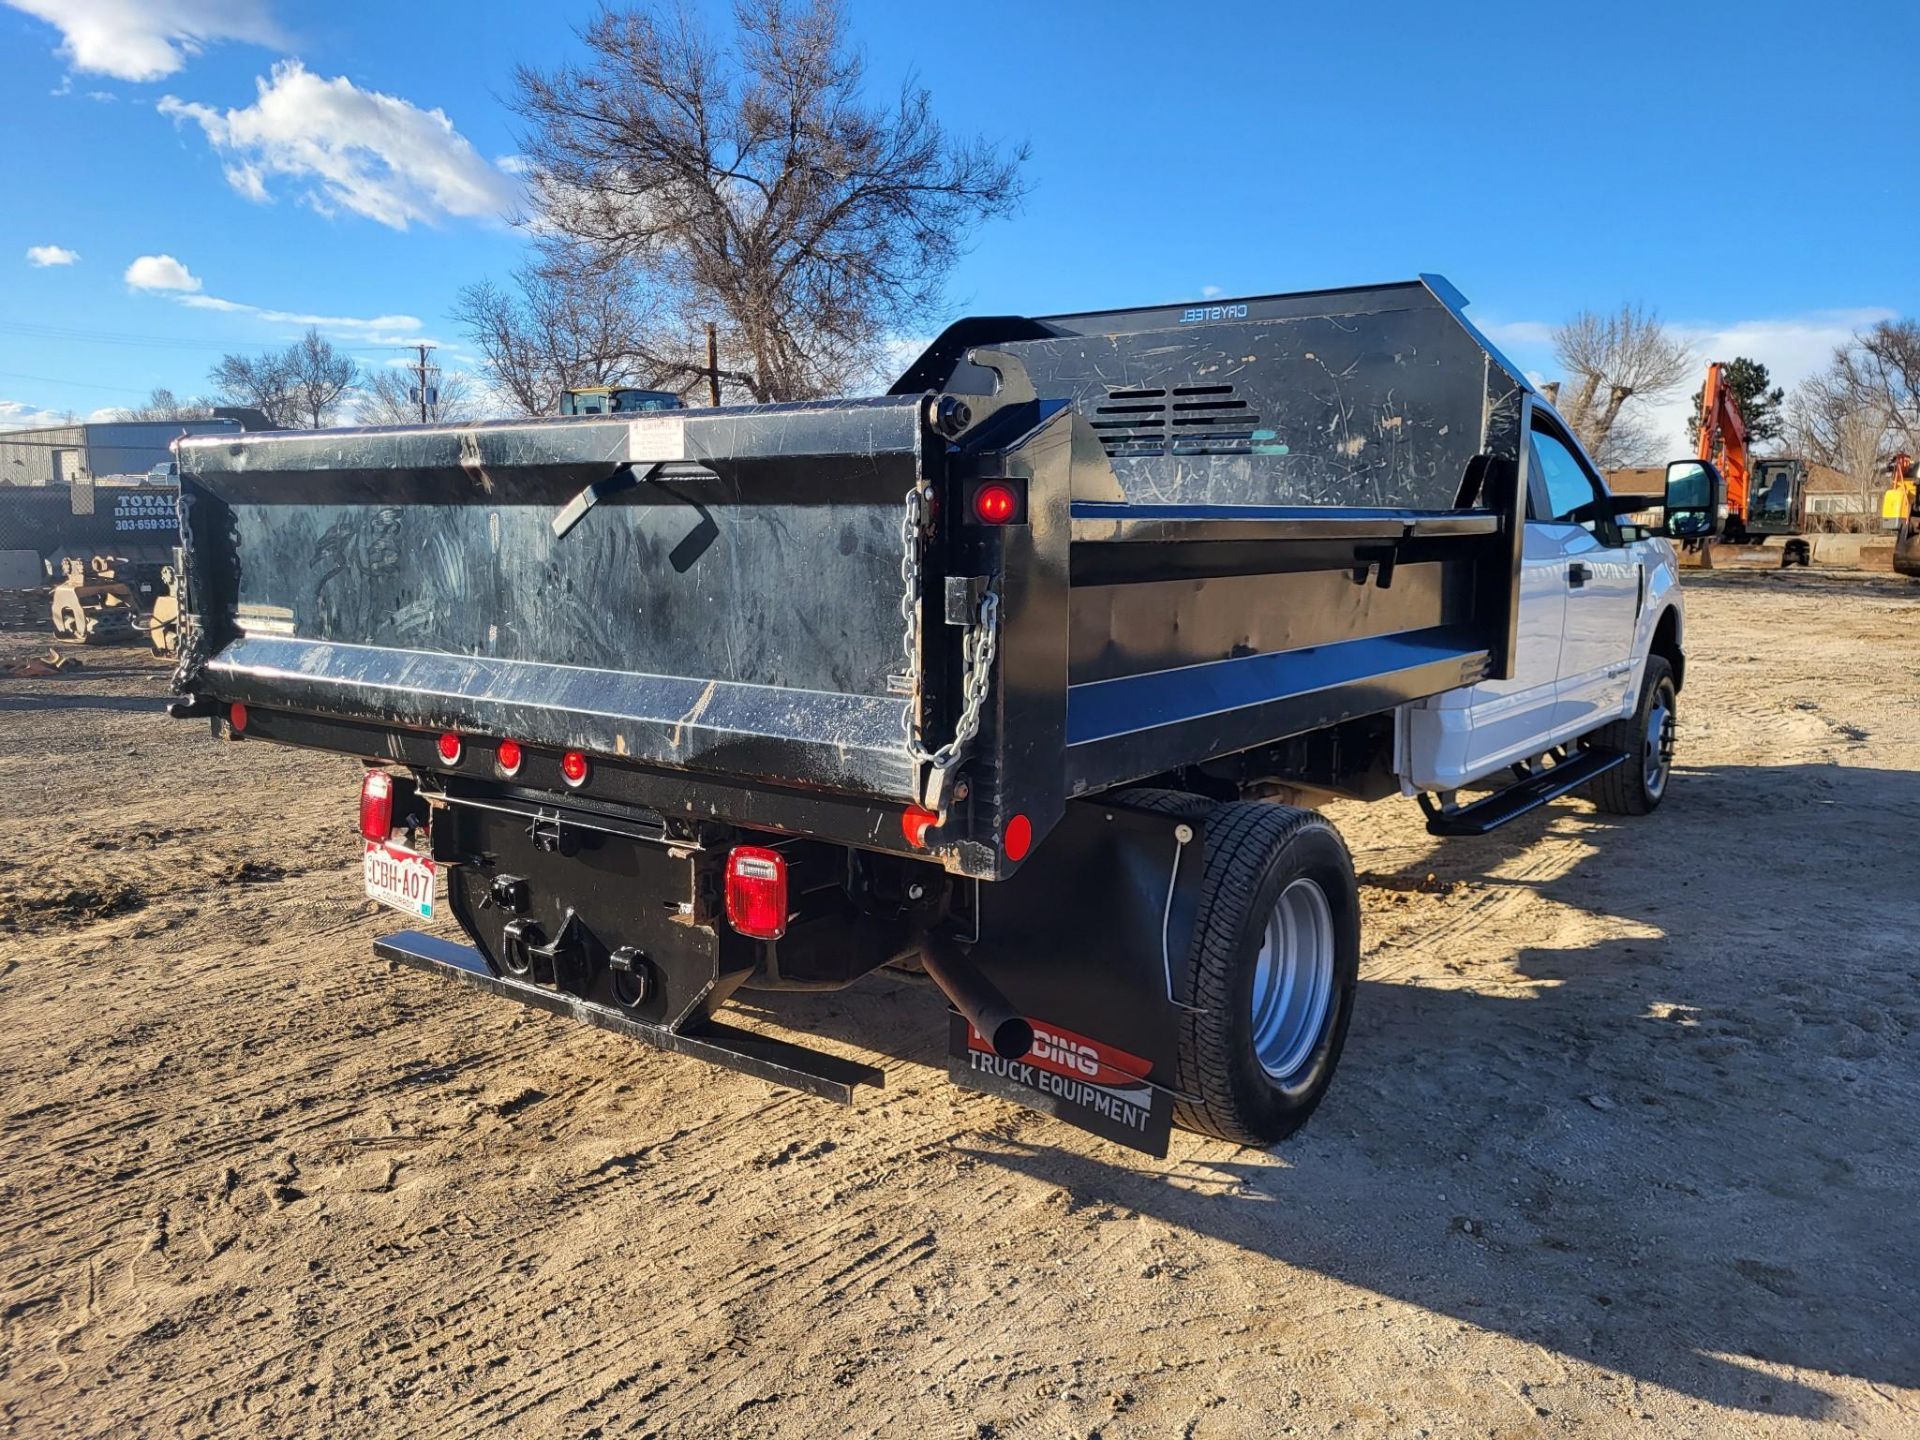 2021 FORD F350 CREW CAB DUALLY DIESEL FLATBED DUMP TRUCK 19,500 MILES! - Image 8 of 37